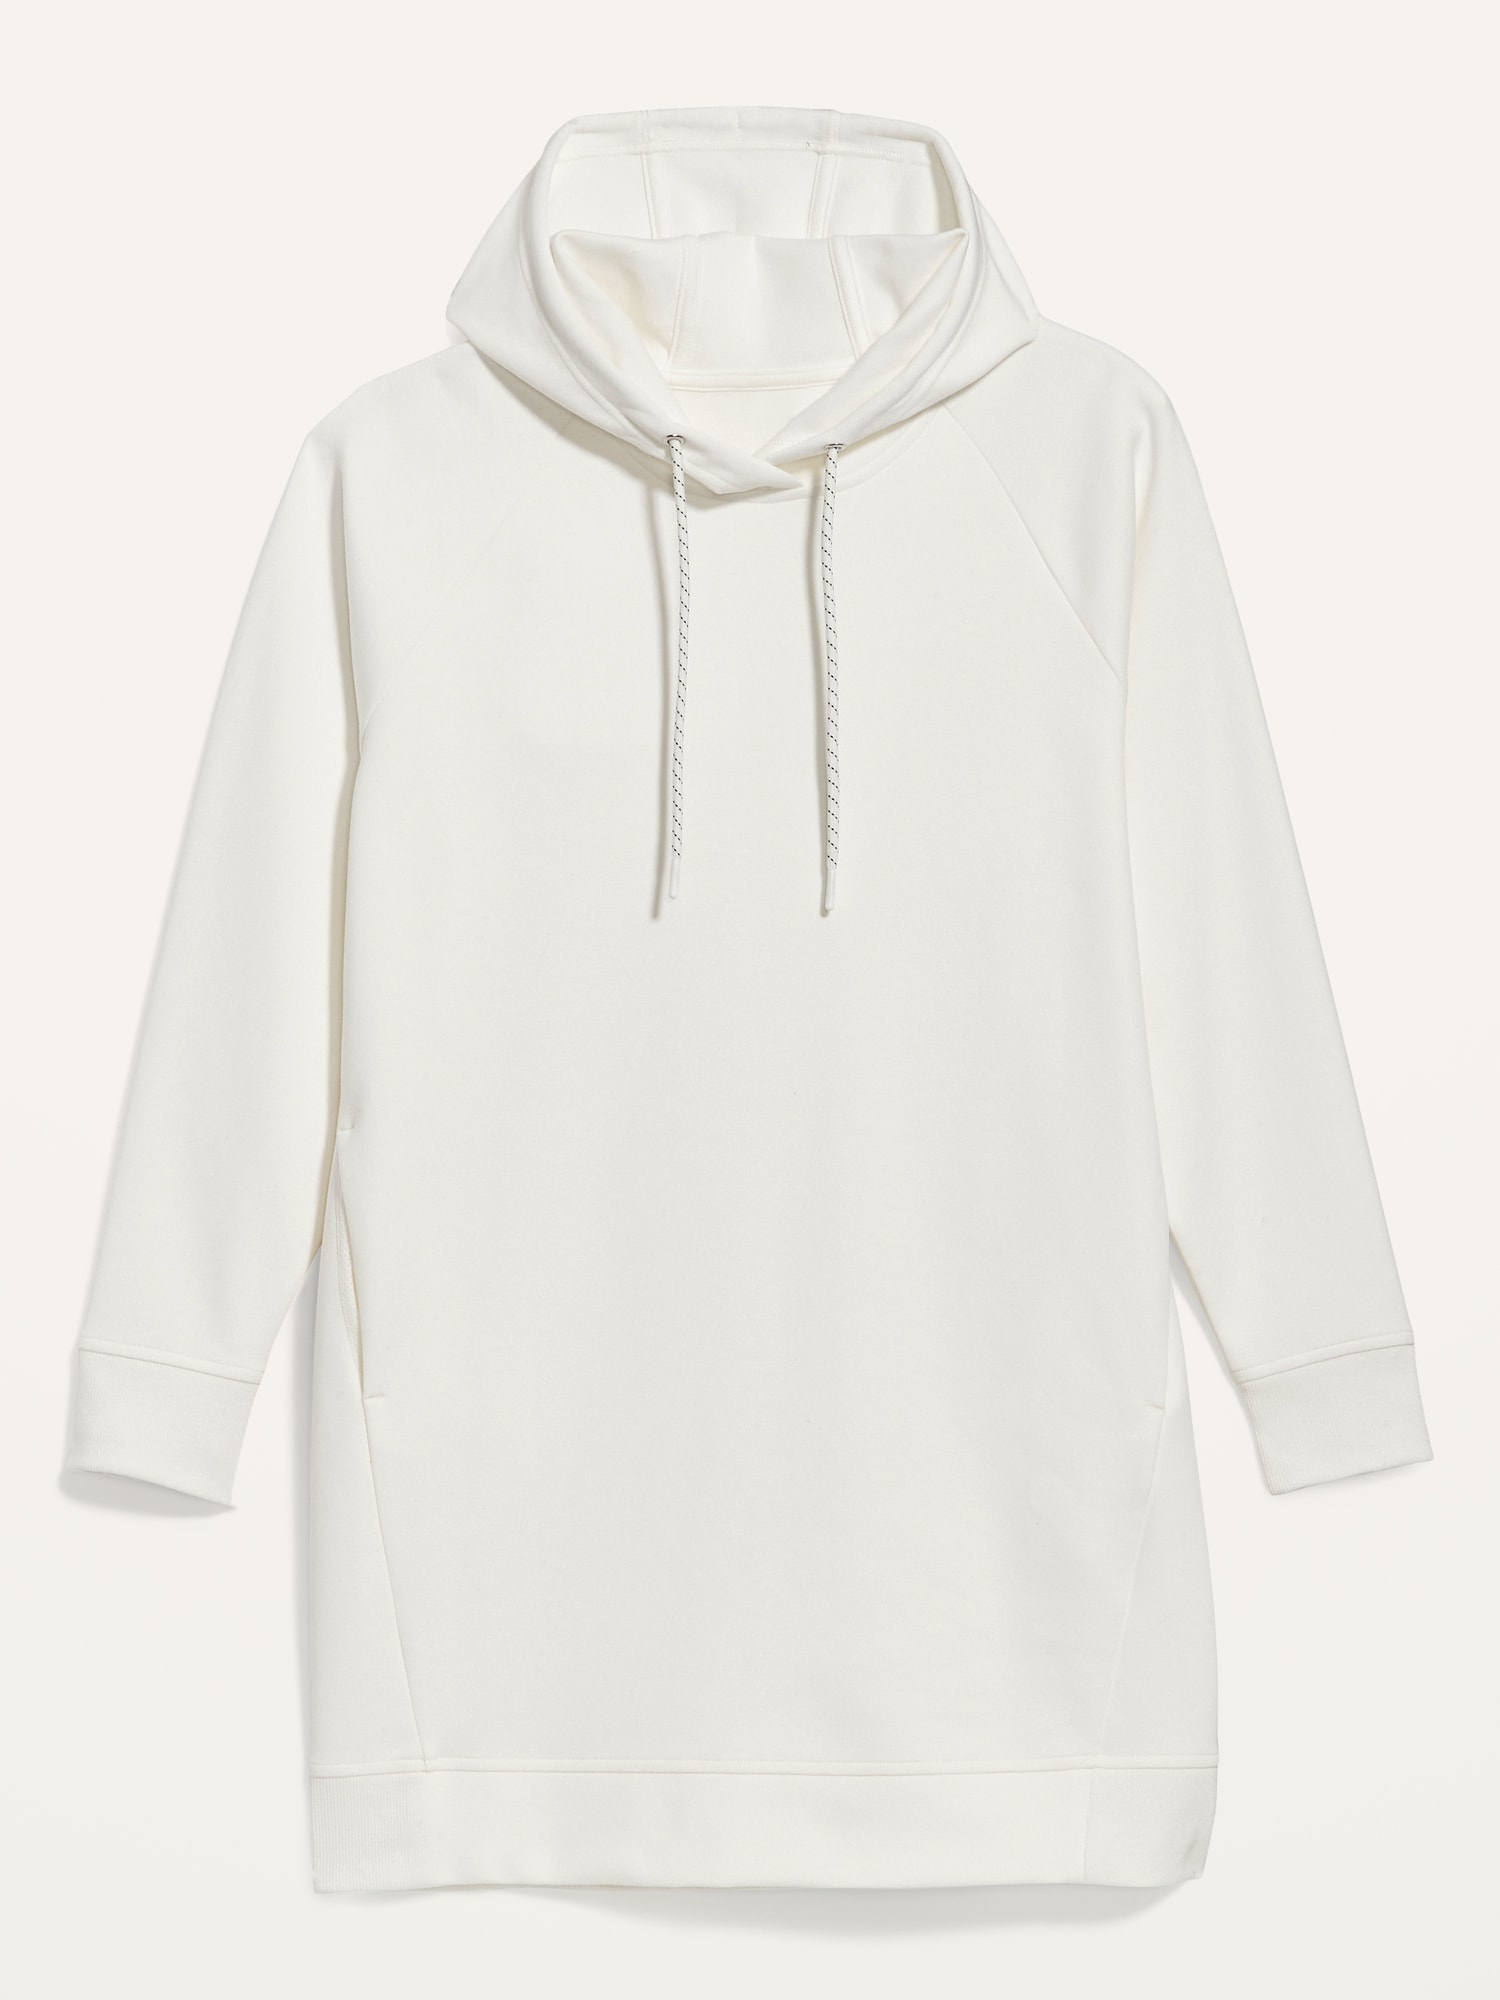 Loose Dynamic Fleece Pullover Hoodie Tunic for Women | Old Navy